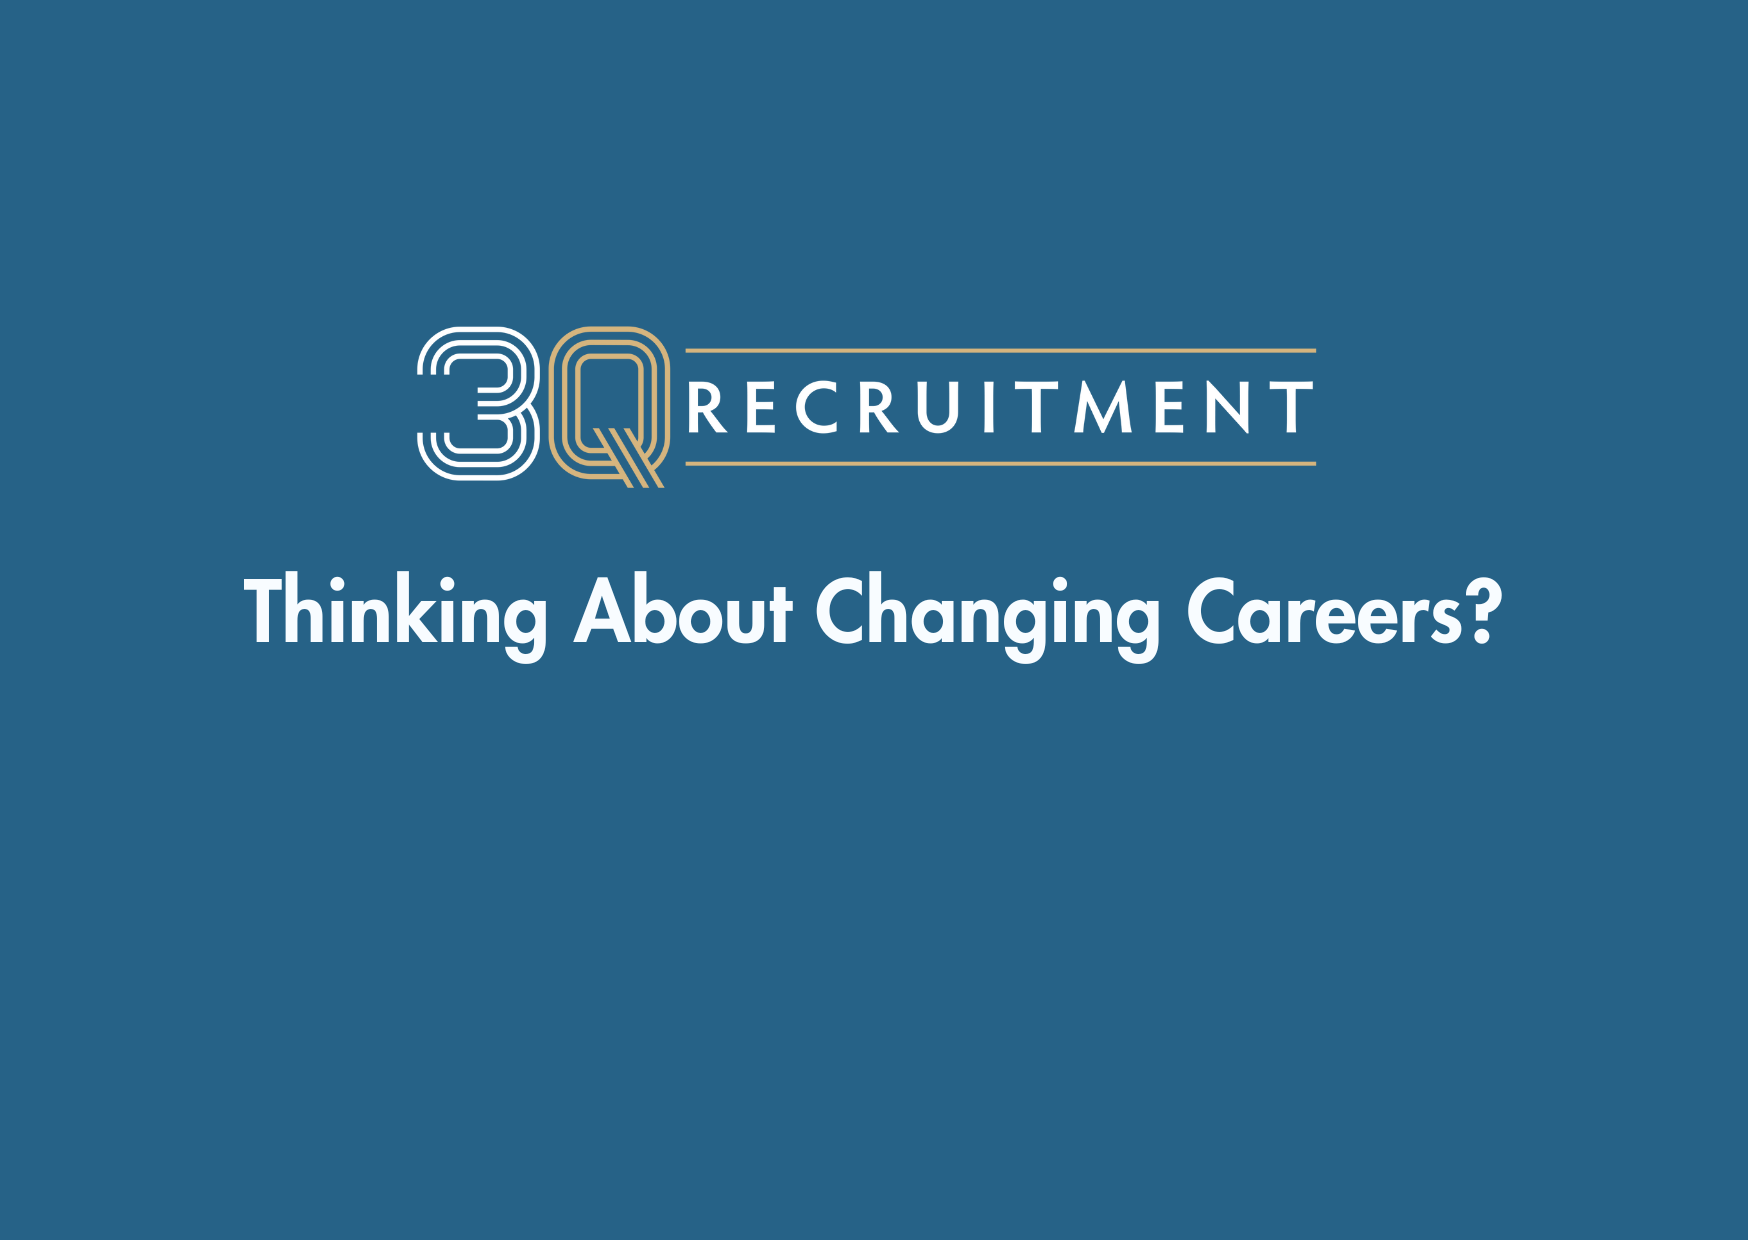 3Q Recruitment Thinking About Changing Careers?